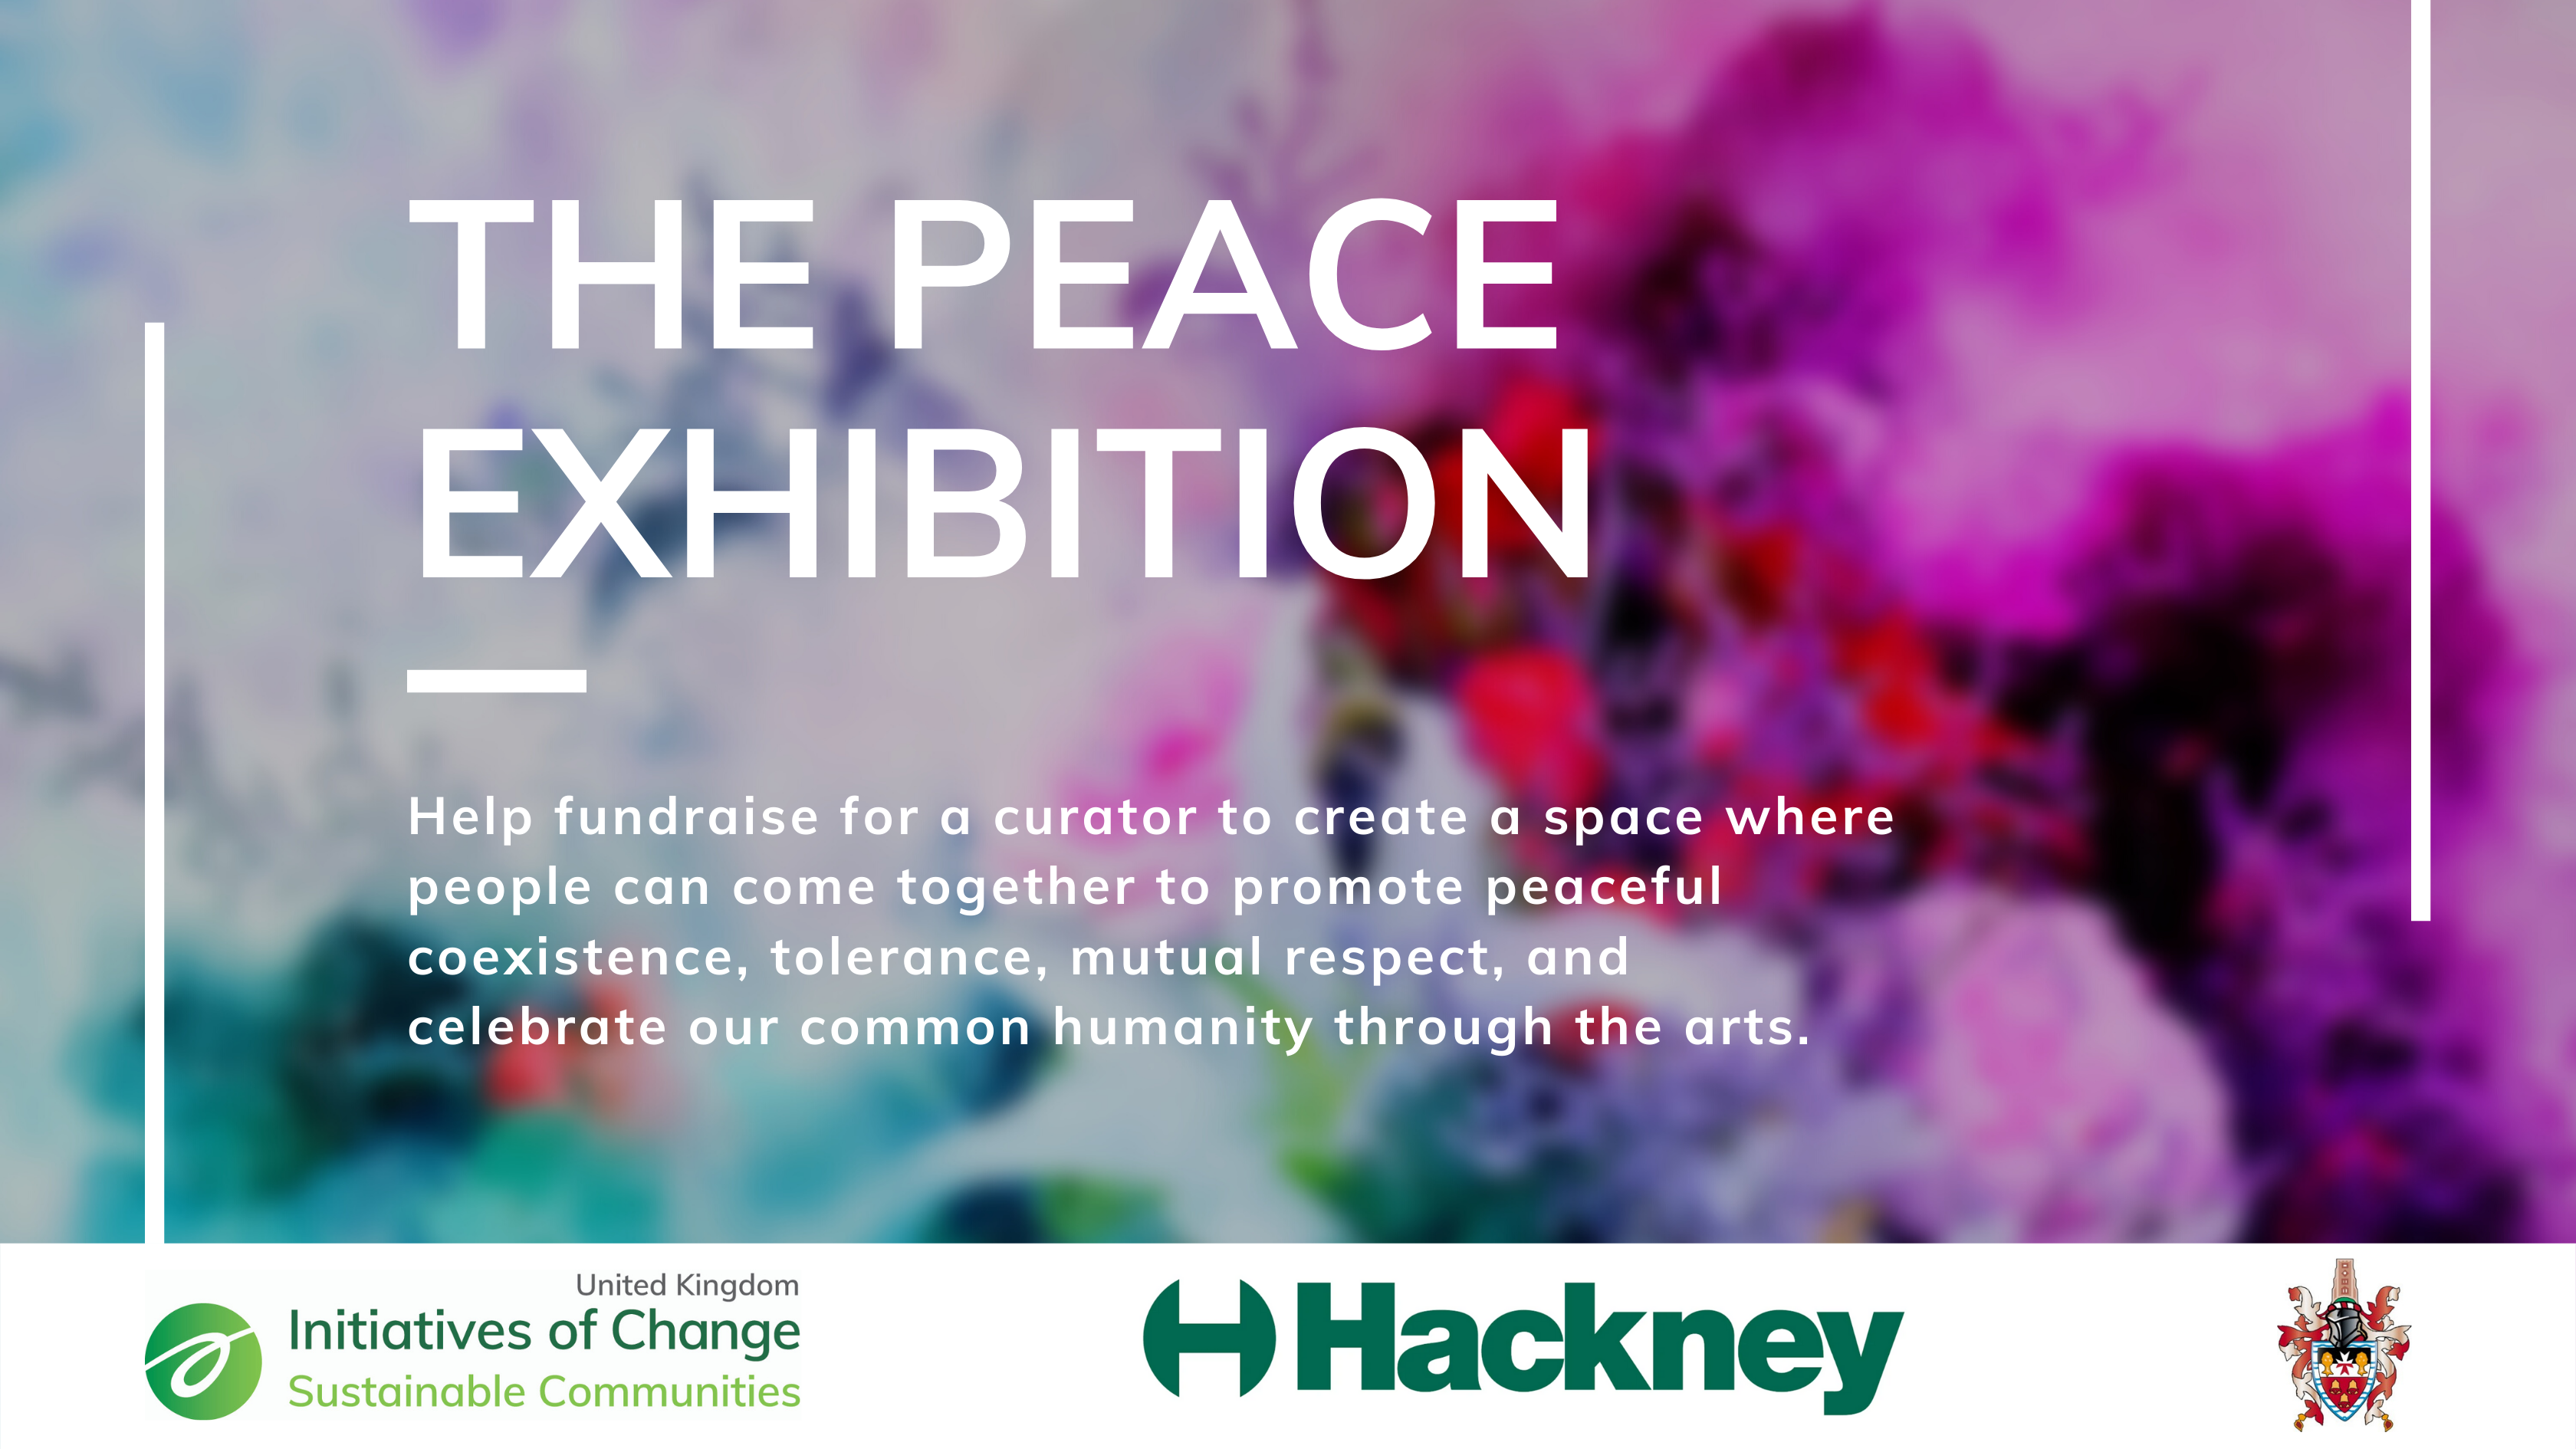 Hackney Peace Art Exhibition: an exciting art exhibition in collaboration with Hackney Council